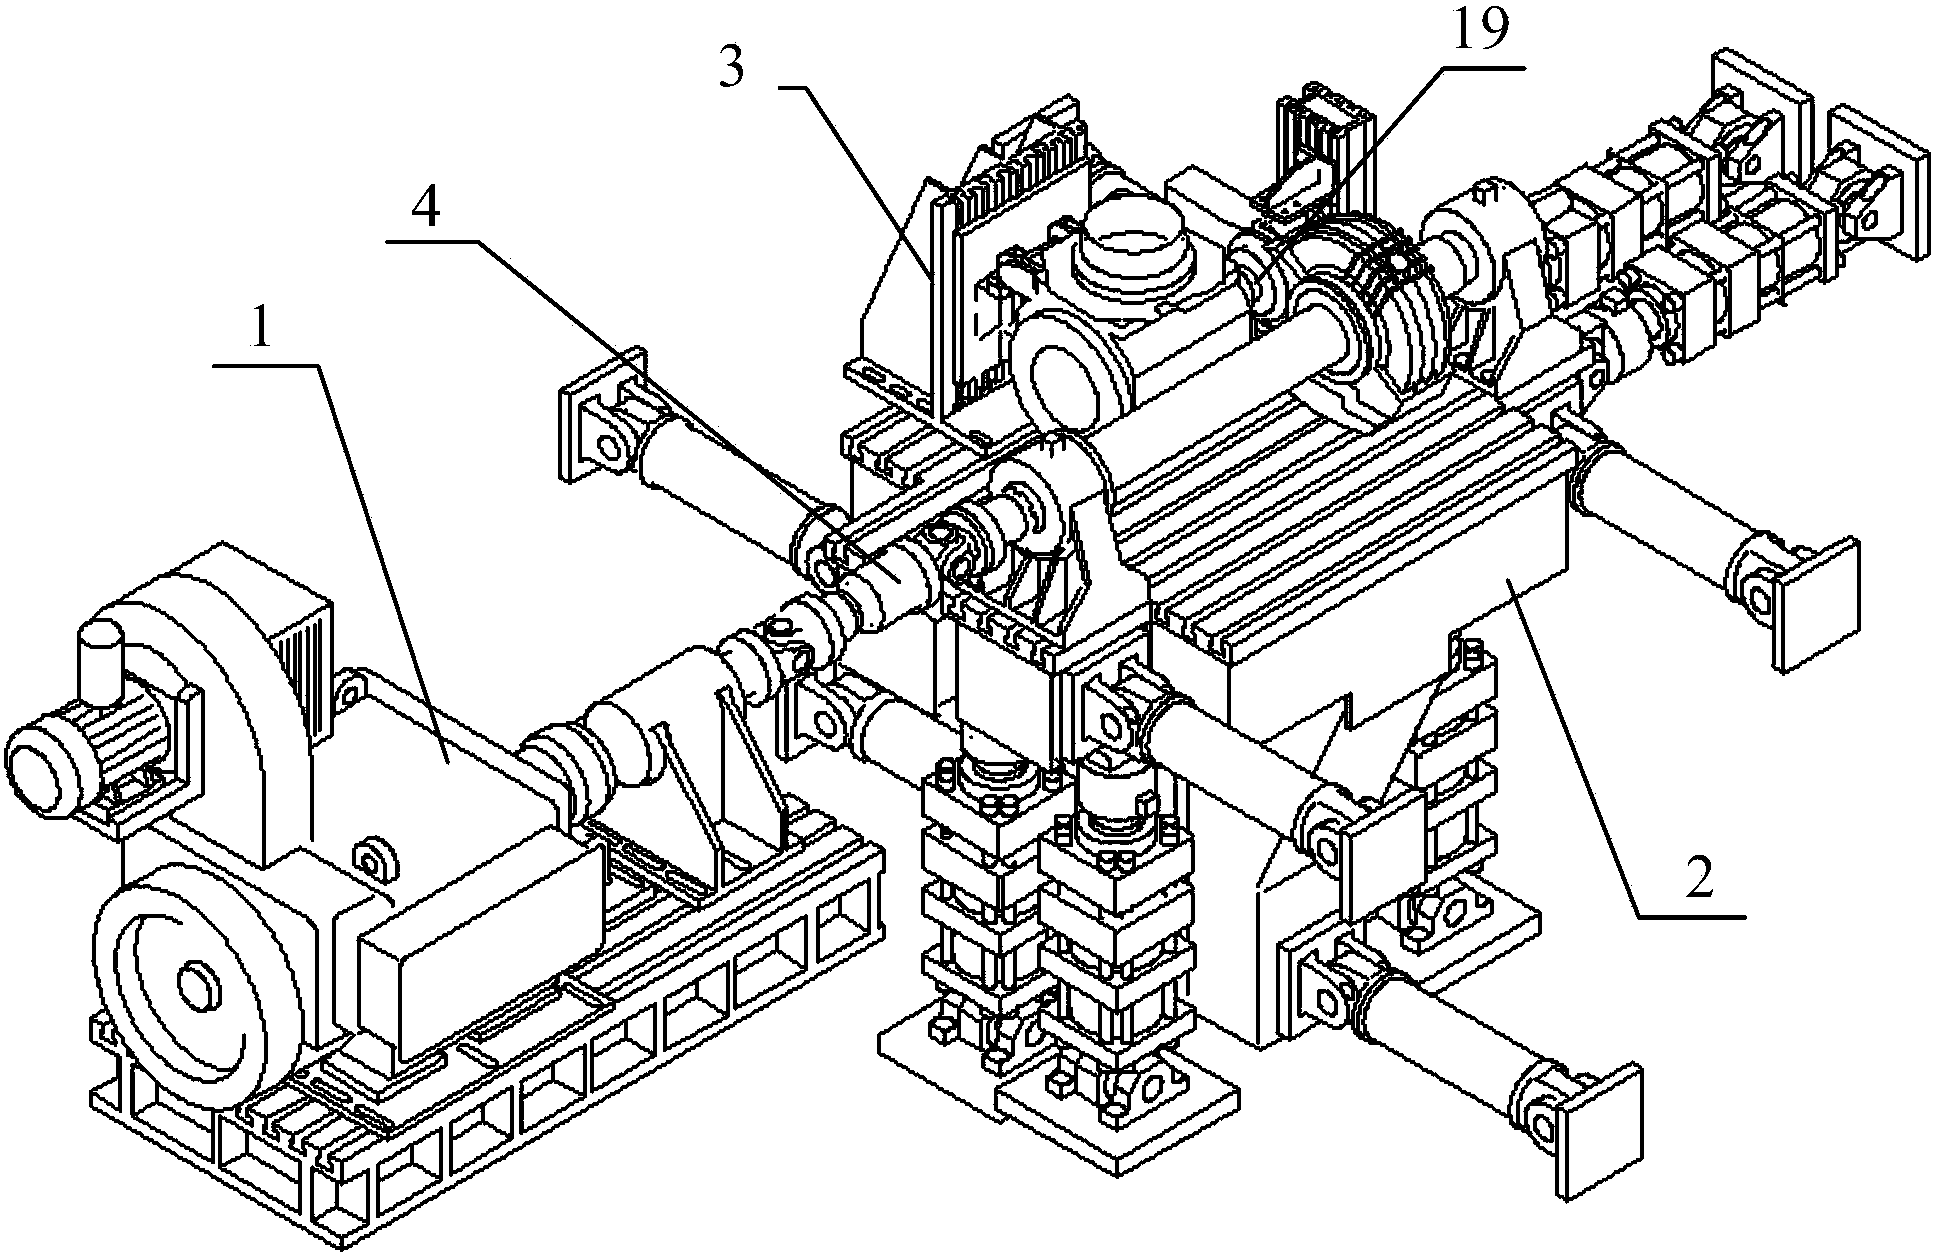 Reliability test bench of two-body six-dimensional vibration drive train assembly for high-speed motor train unit